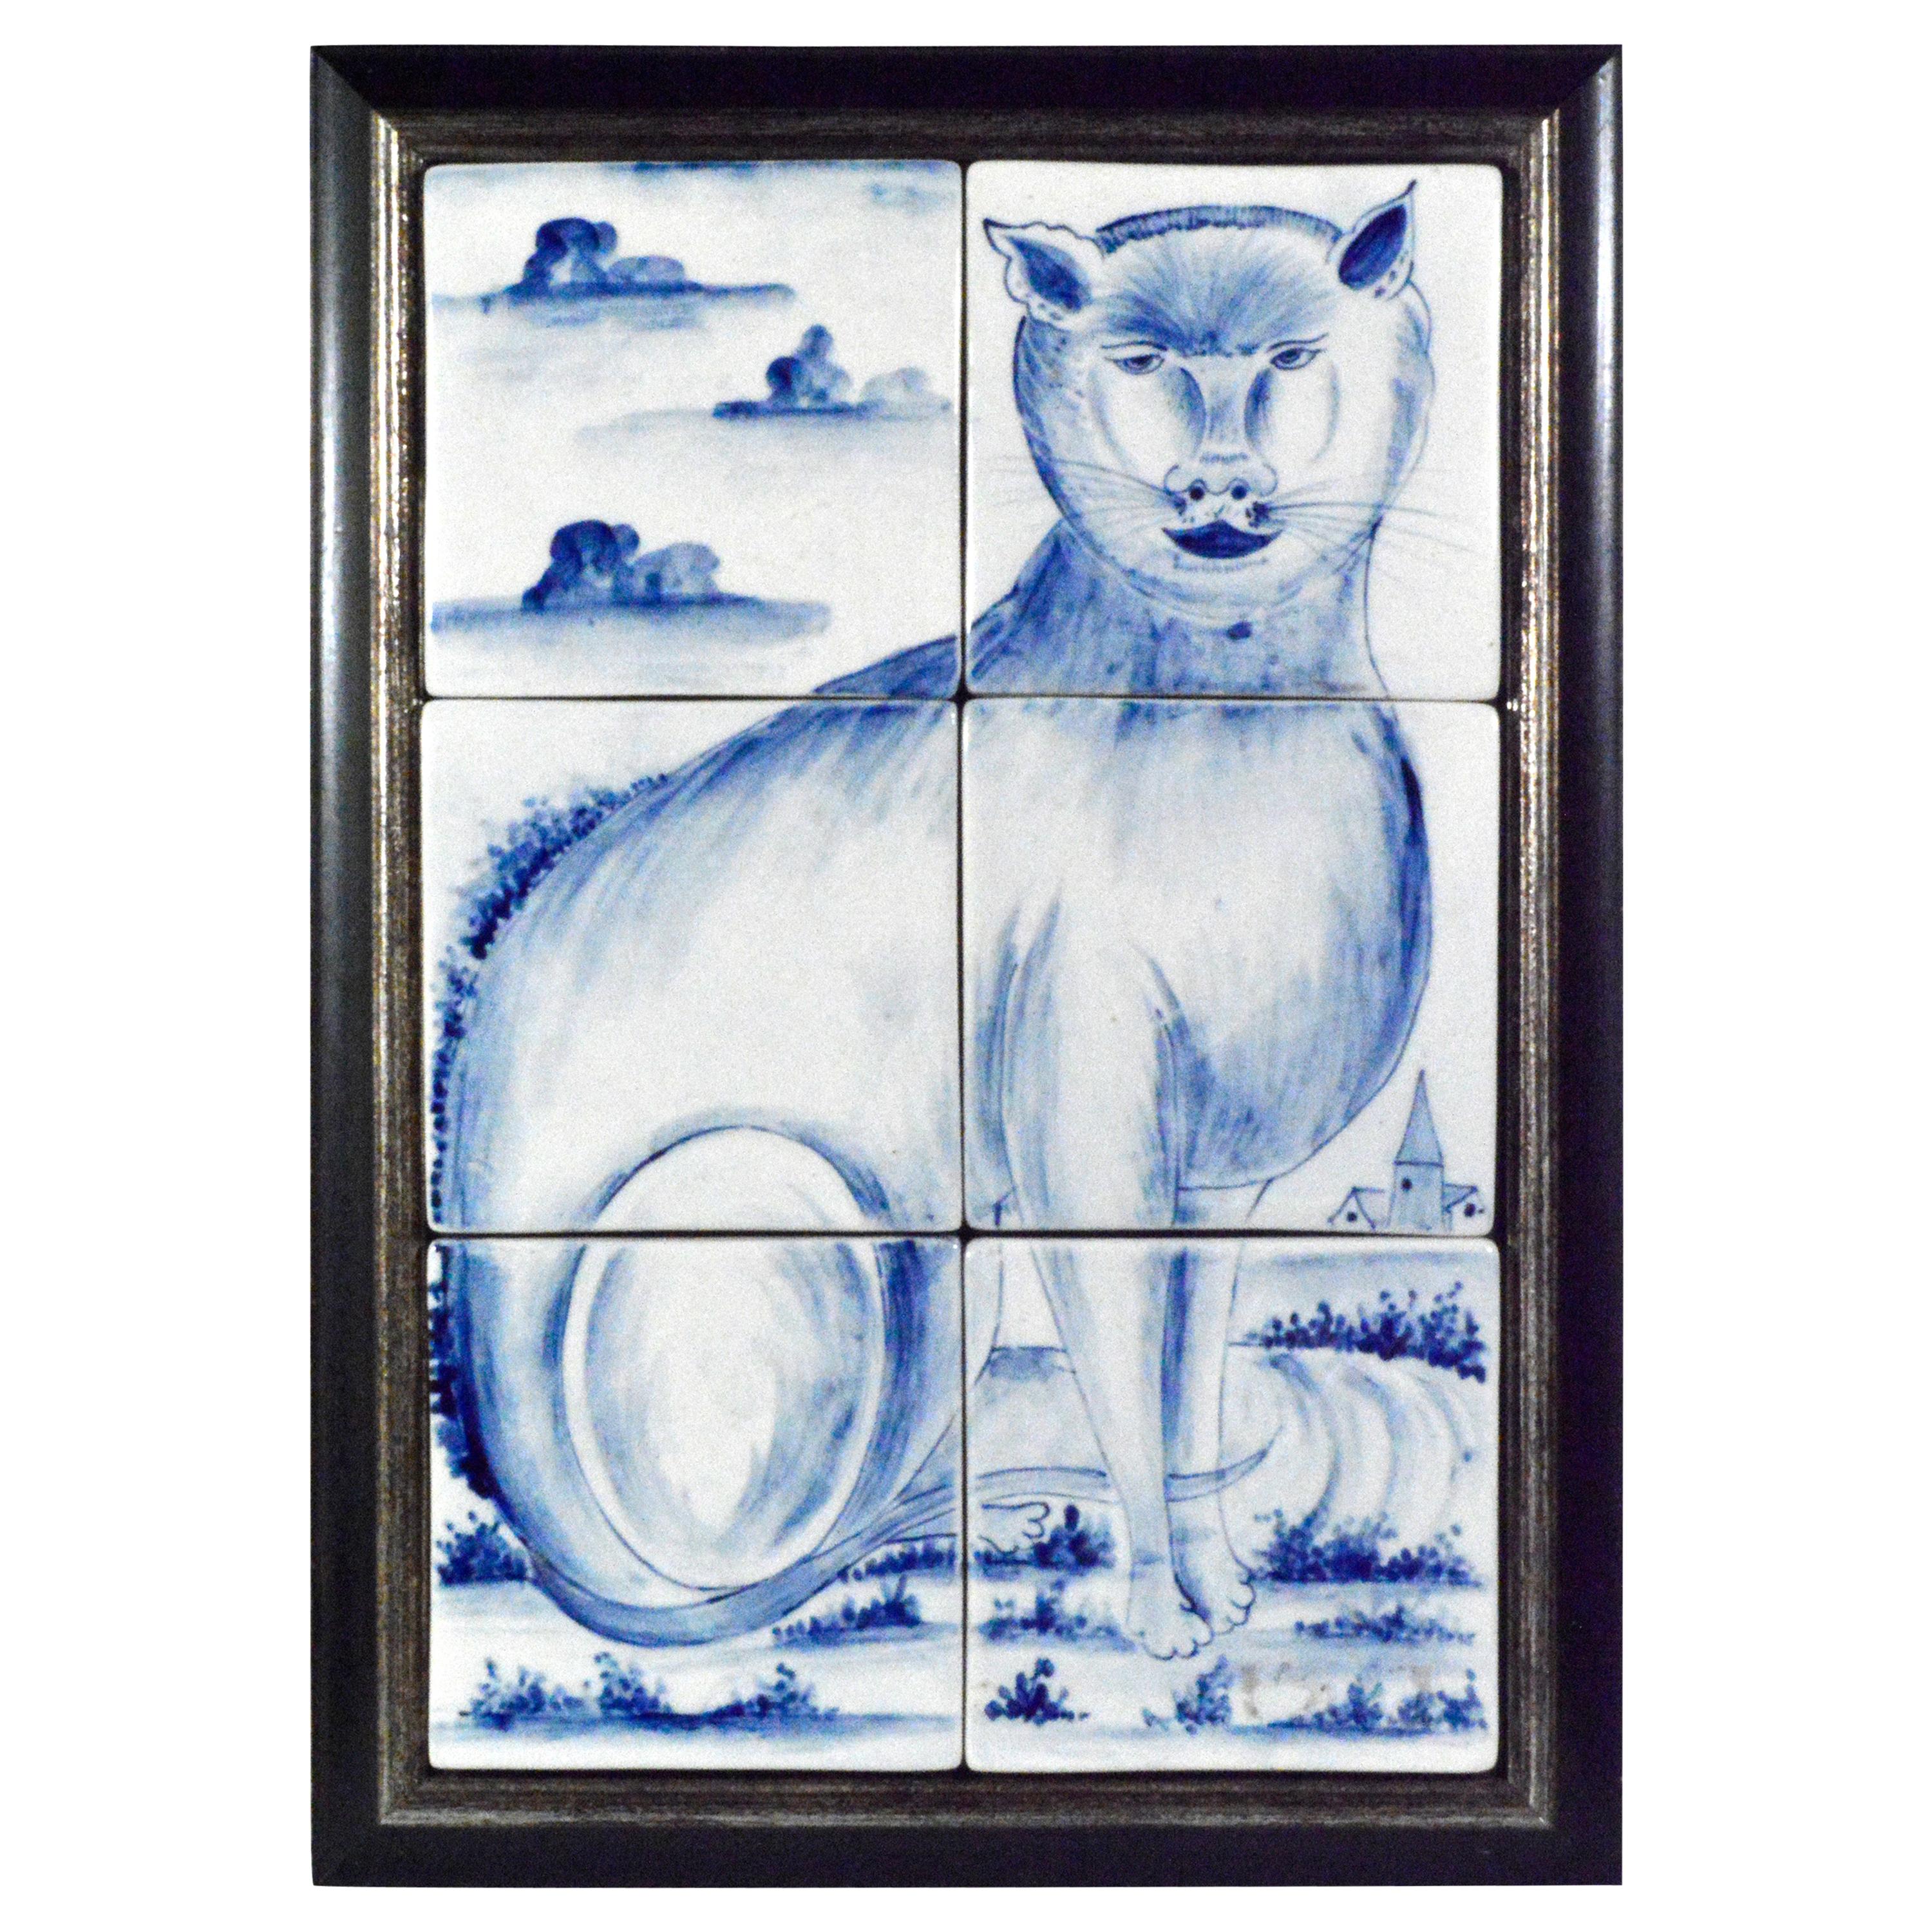 Charming Dutch Tin-Glazed Earthenware Tile Picture of a Cat